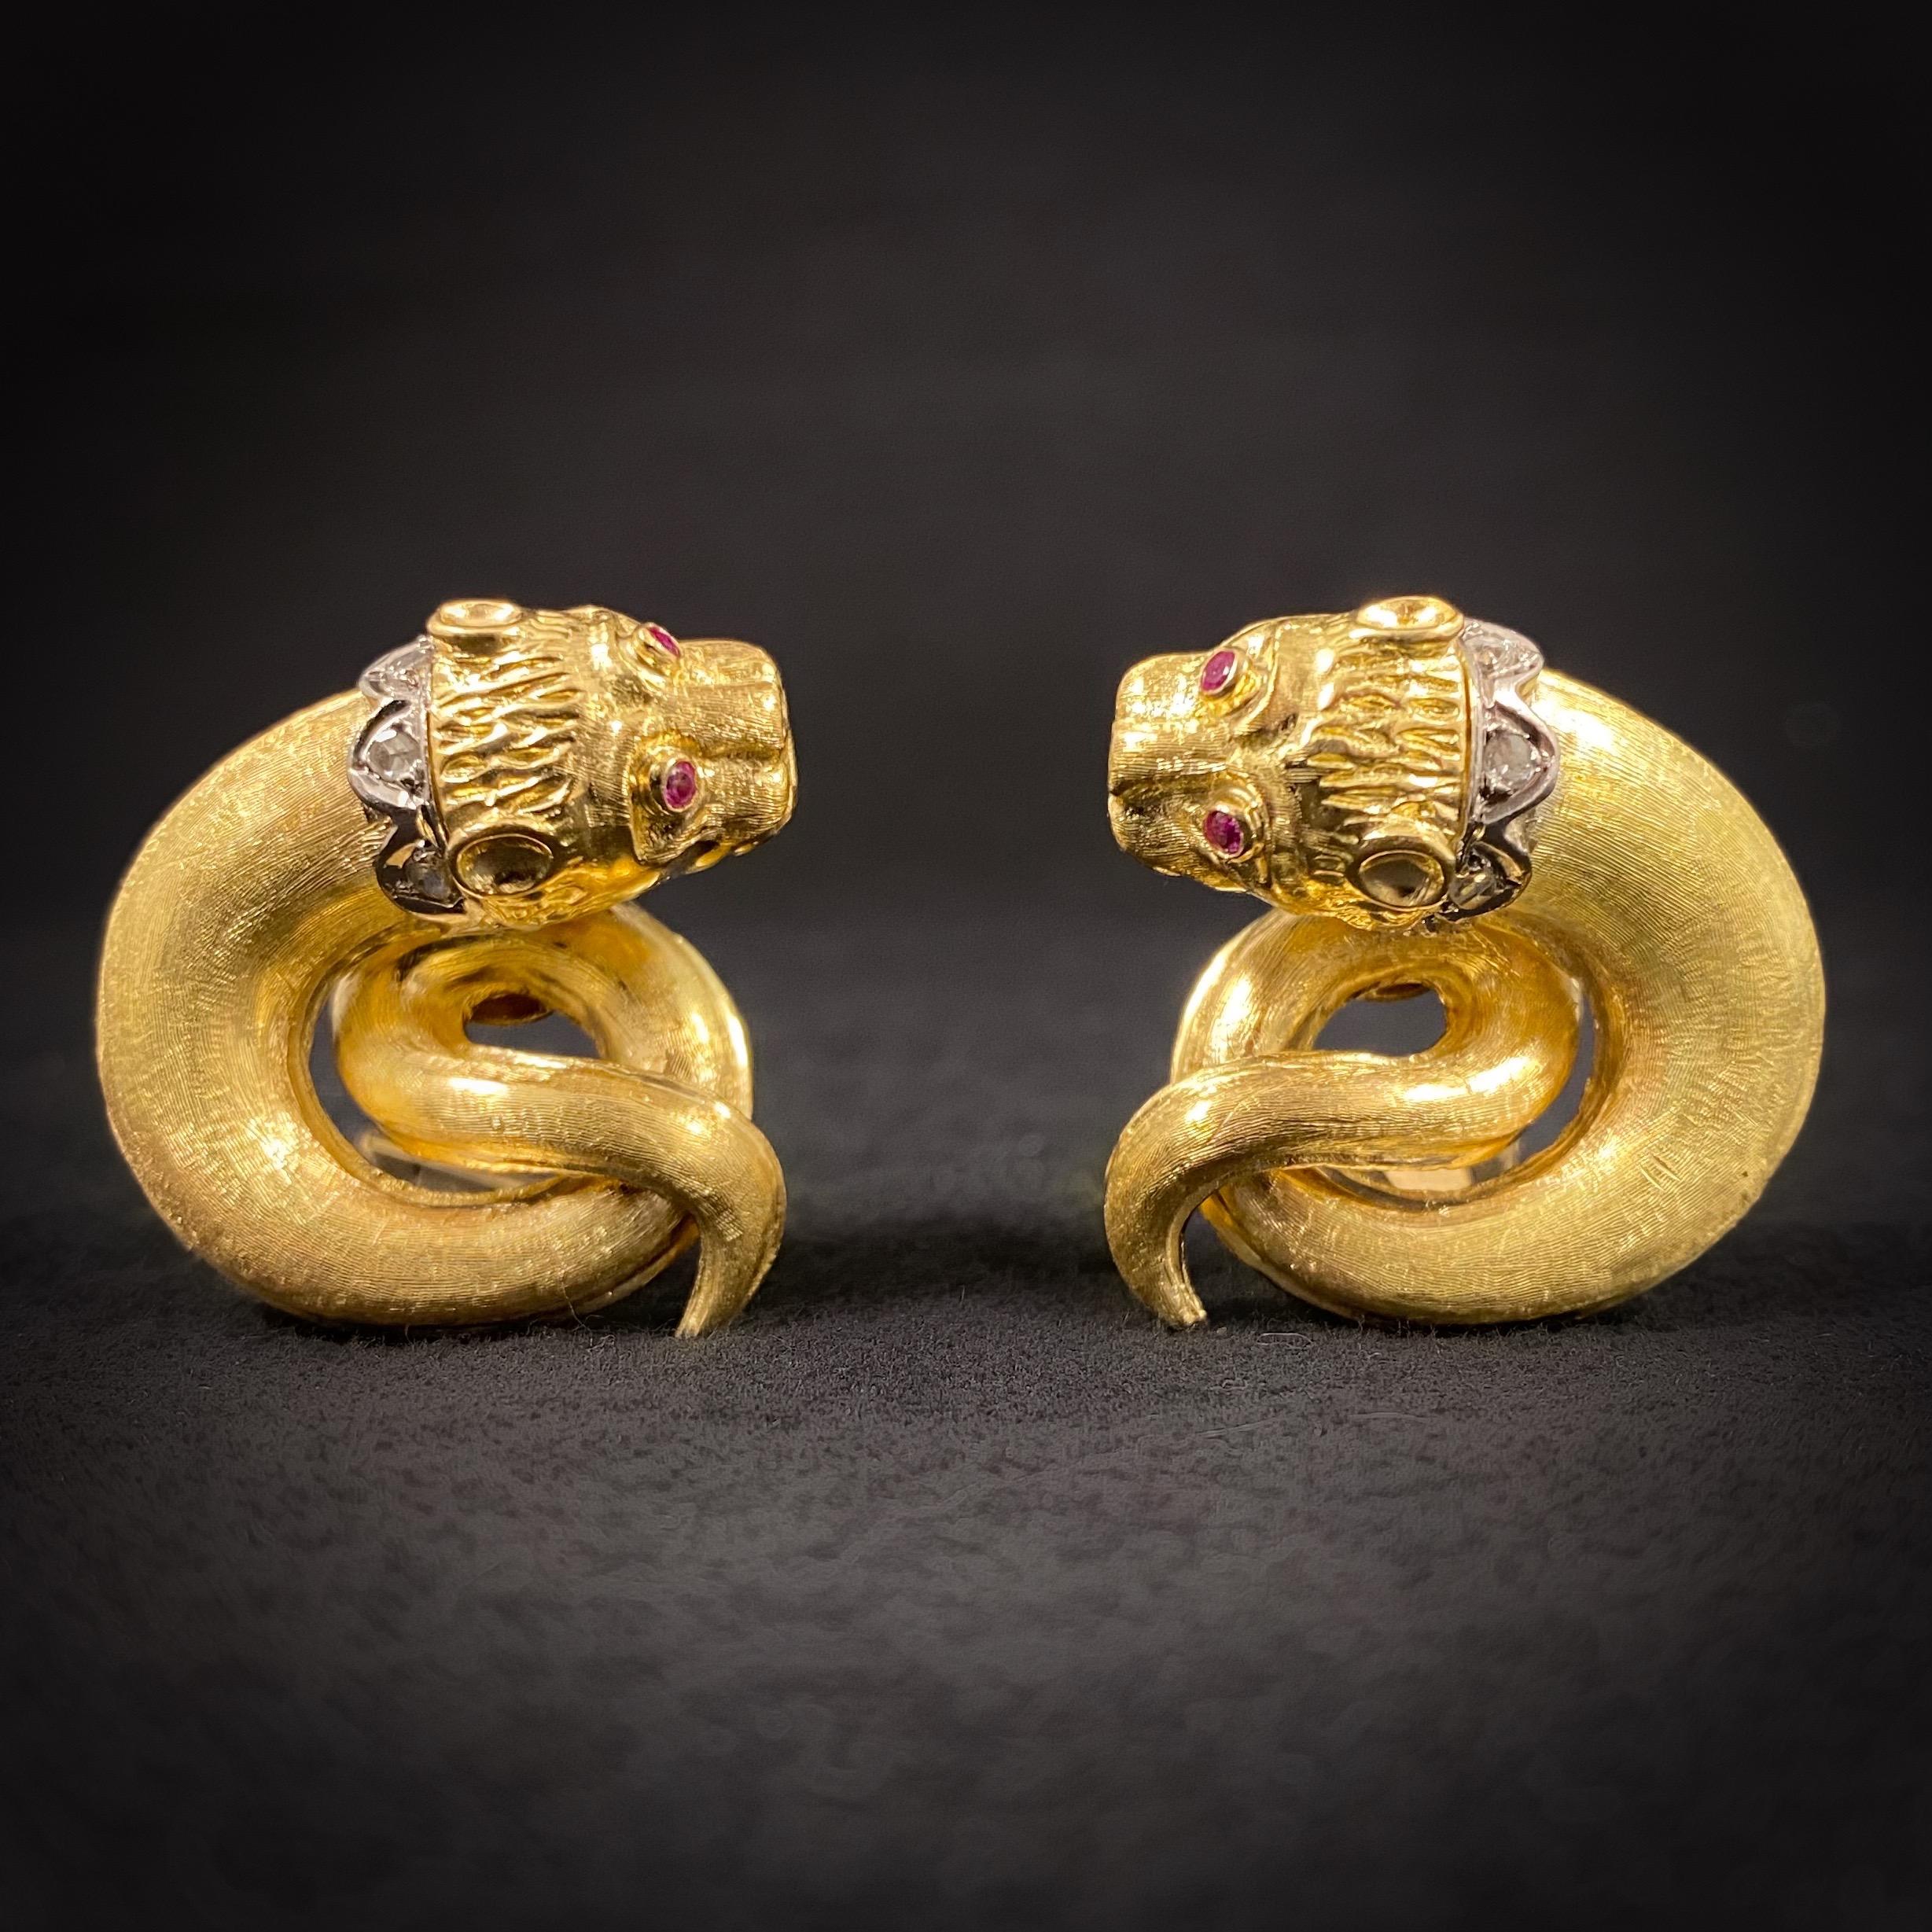 Zolotas Vintage Diamond and Ruby Mythical Mycenaen Lion Mask Earrings in 18K Yellow and White Gold, Greece, 1970s. Each carved lion’s head is accented by circular-shape ruby eyes and a rose-cut diamond collar set in white gold, issuing a textured